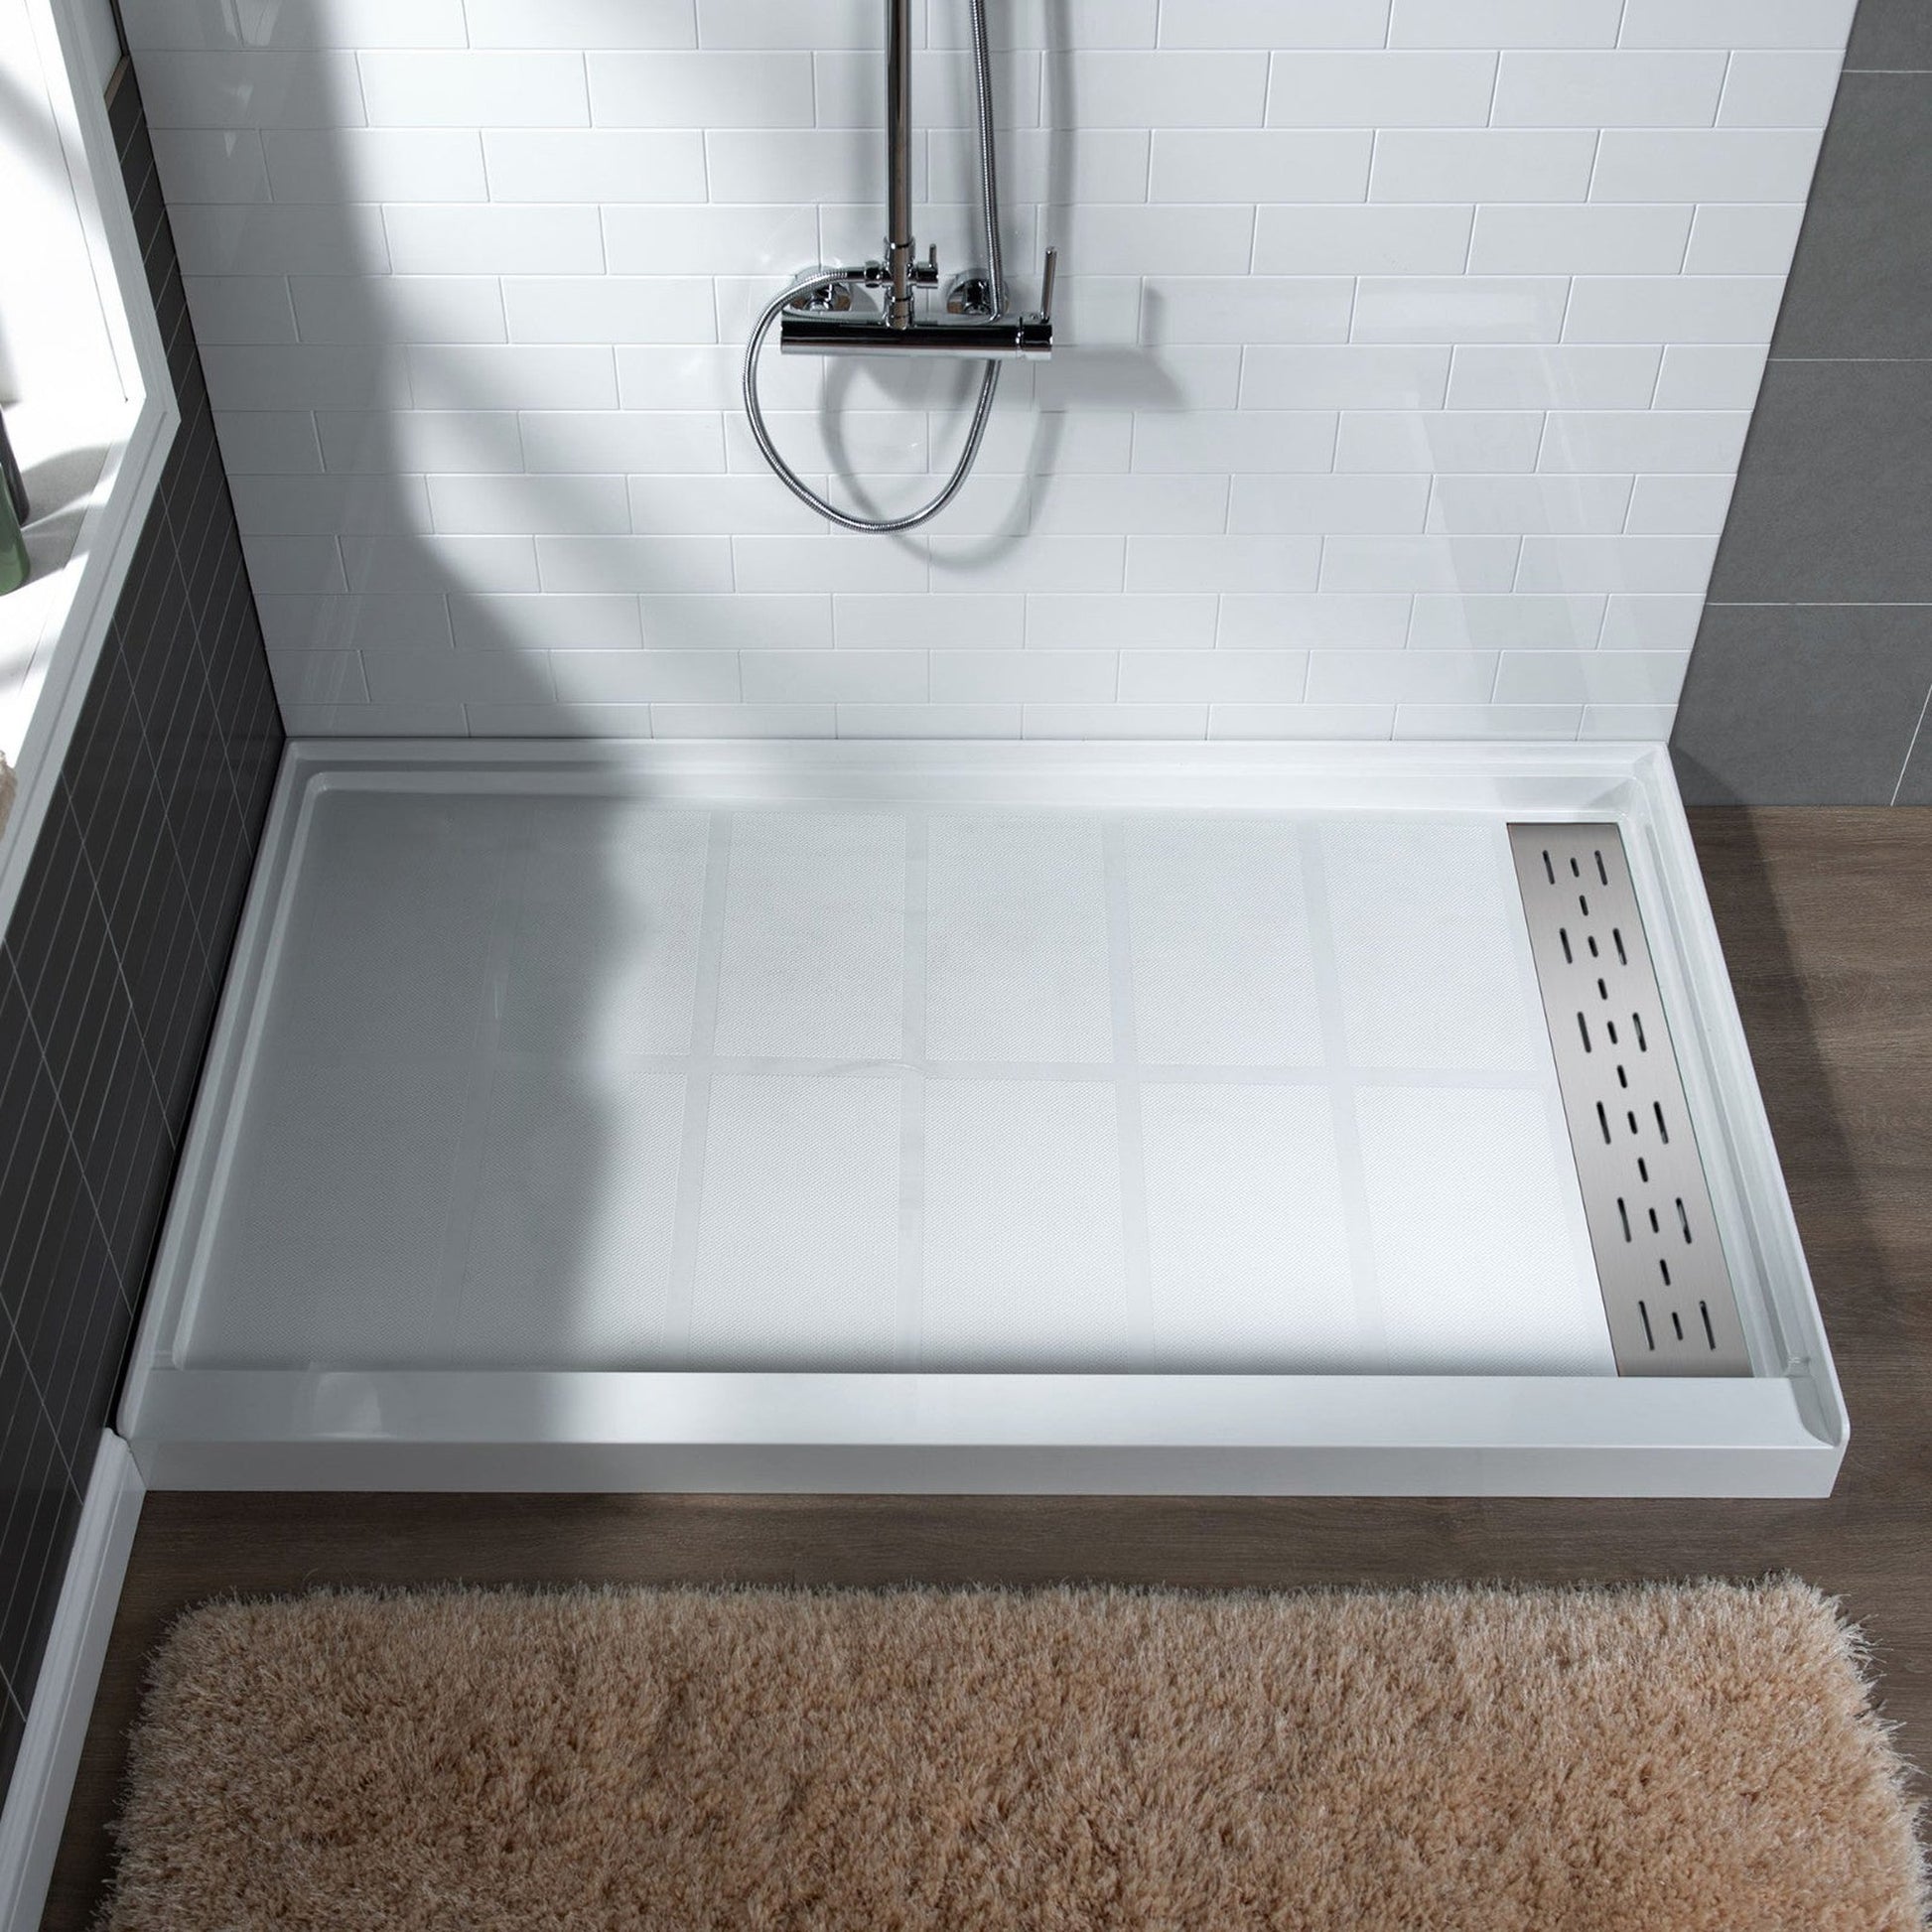 WoodBridge 48" x 36" White Solid Surface Shower Base Right Drain Location With Brushed Nickel Trench Drain Cover